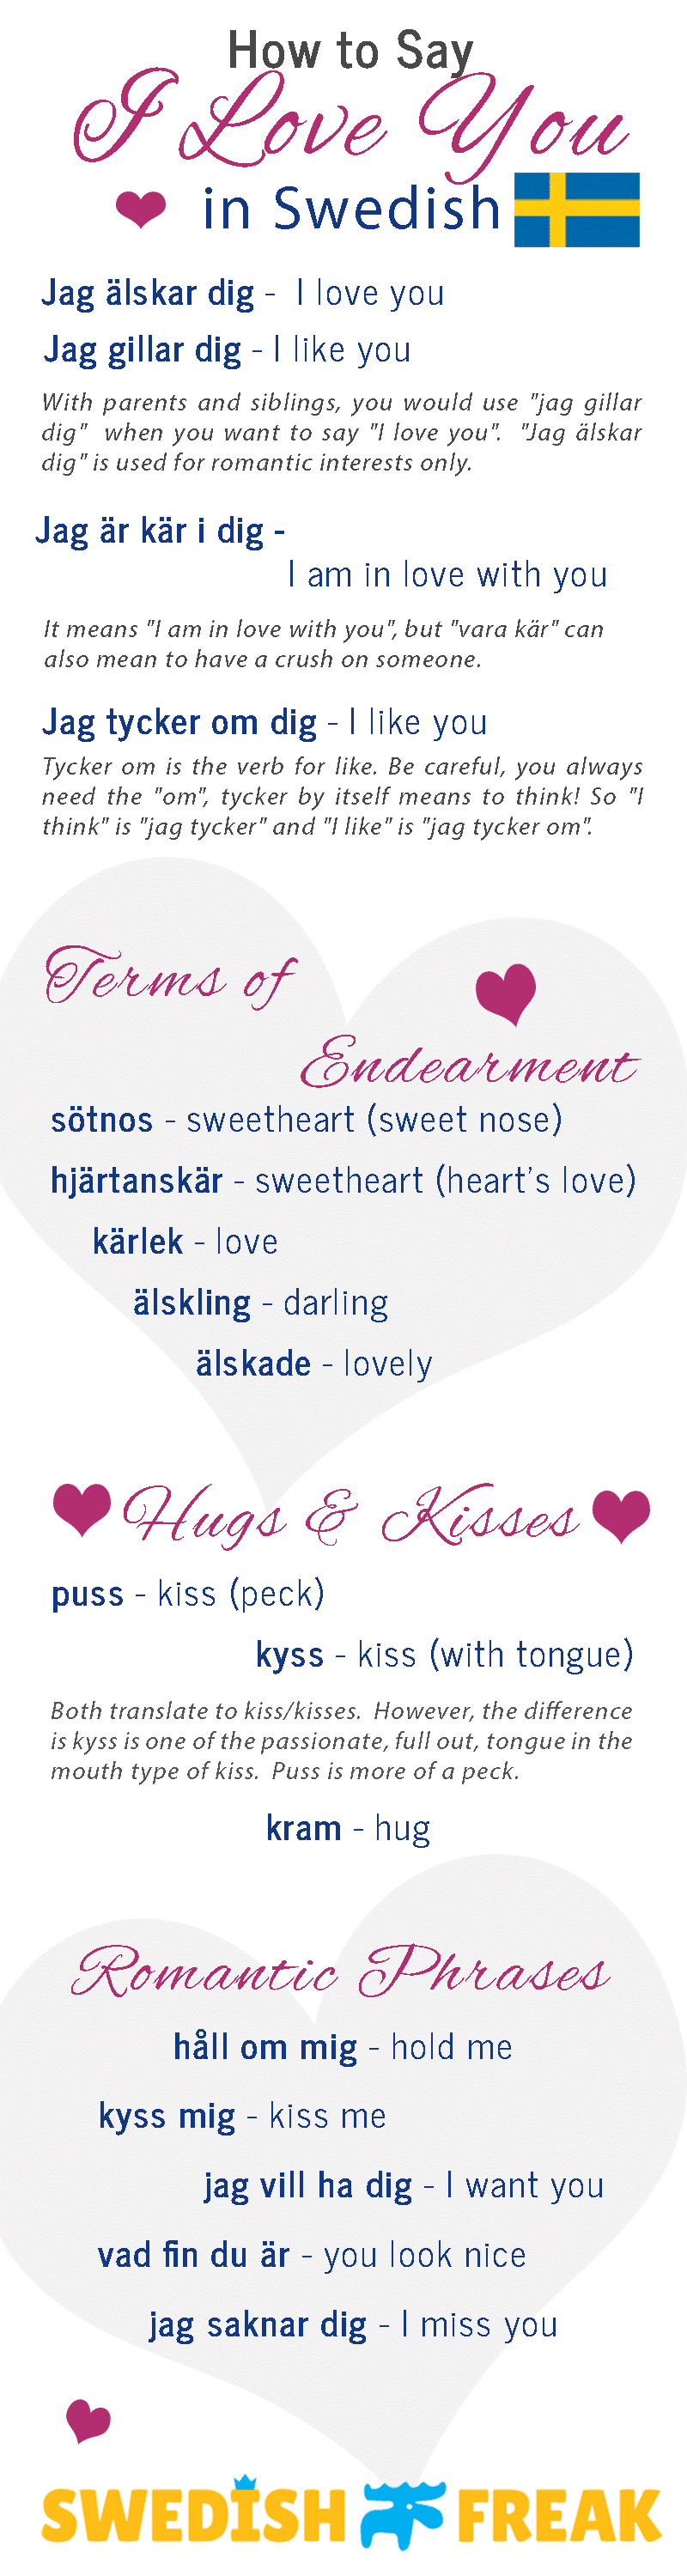 How to say I love you in Swedish, infographic